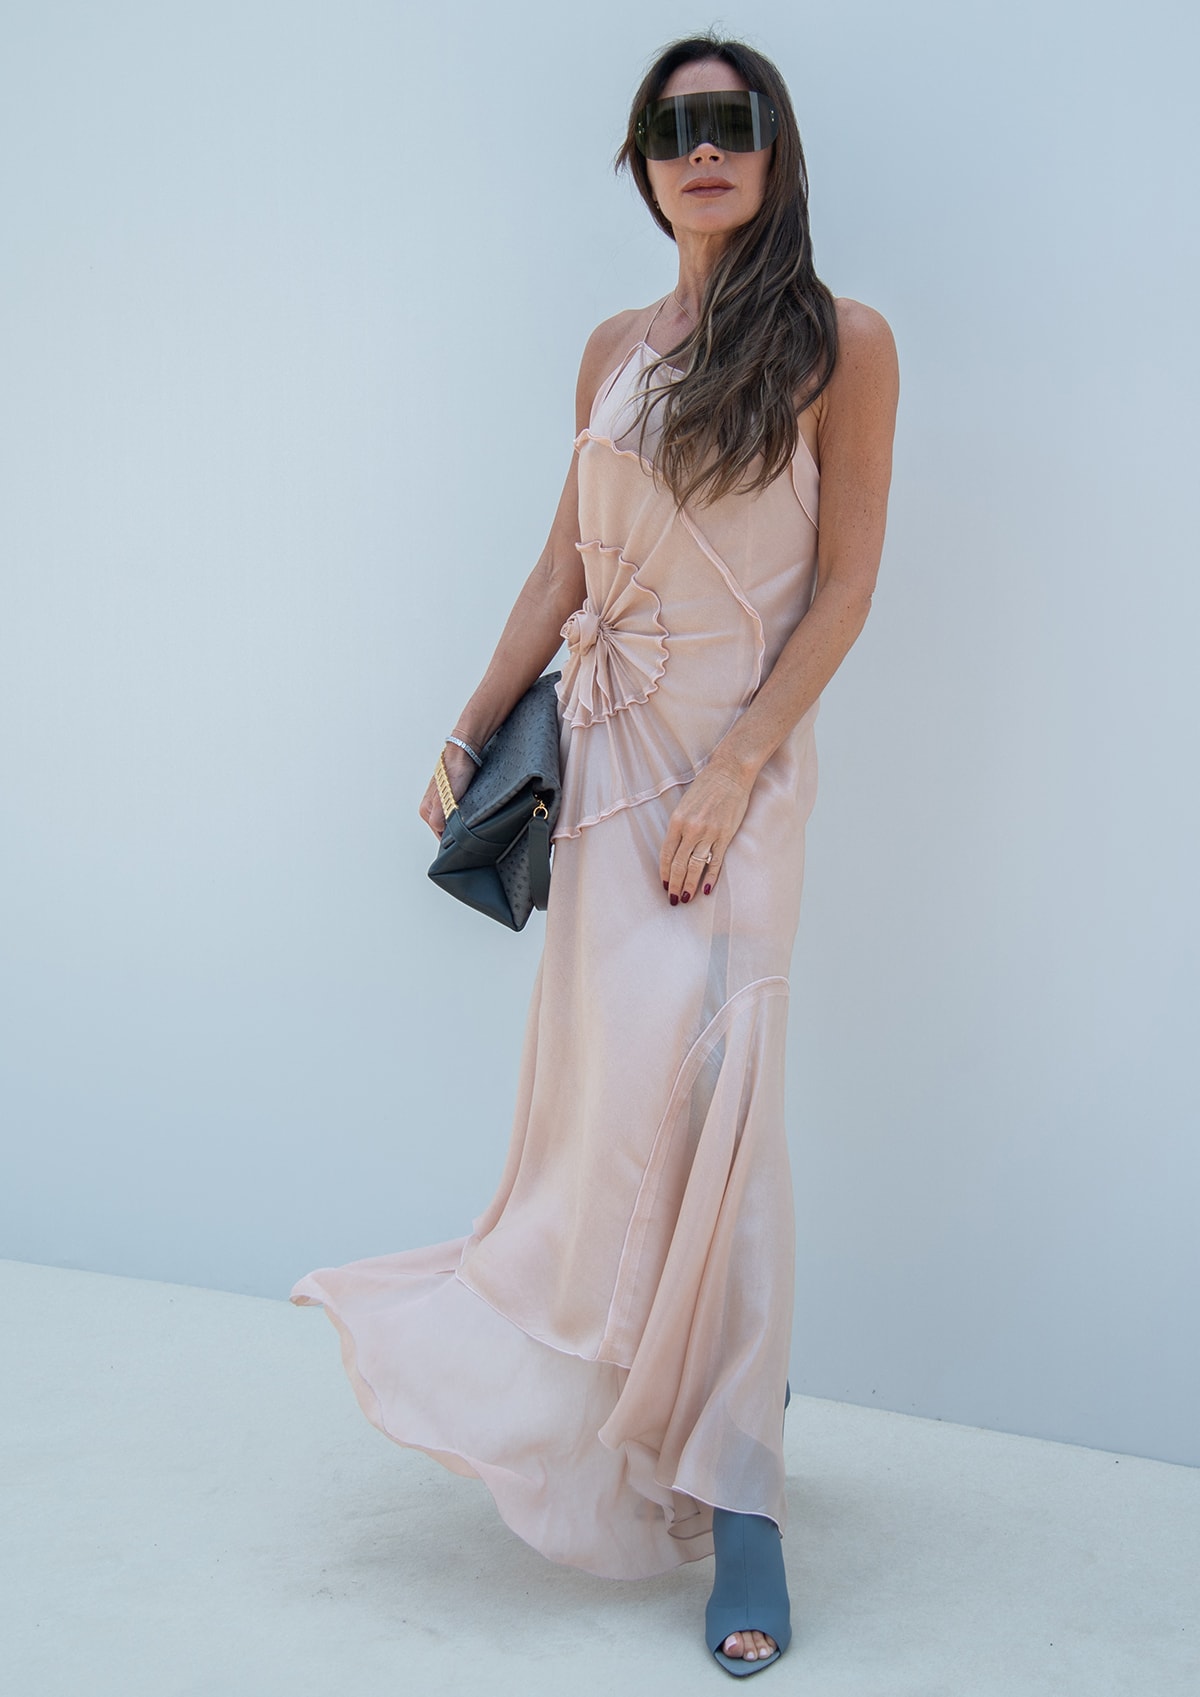 Victoria Beckham models her own design featuring a shimmering pale pink dress with a large rosette on the right hip and an asymmetrical hem